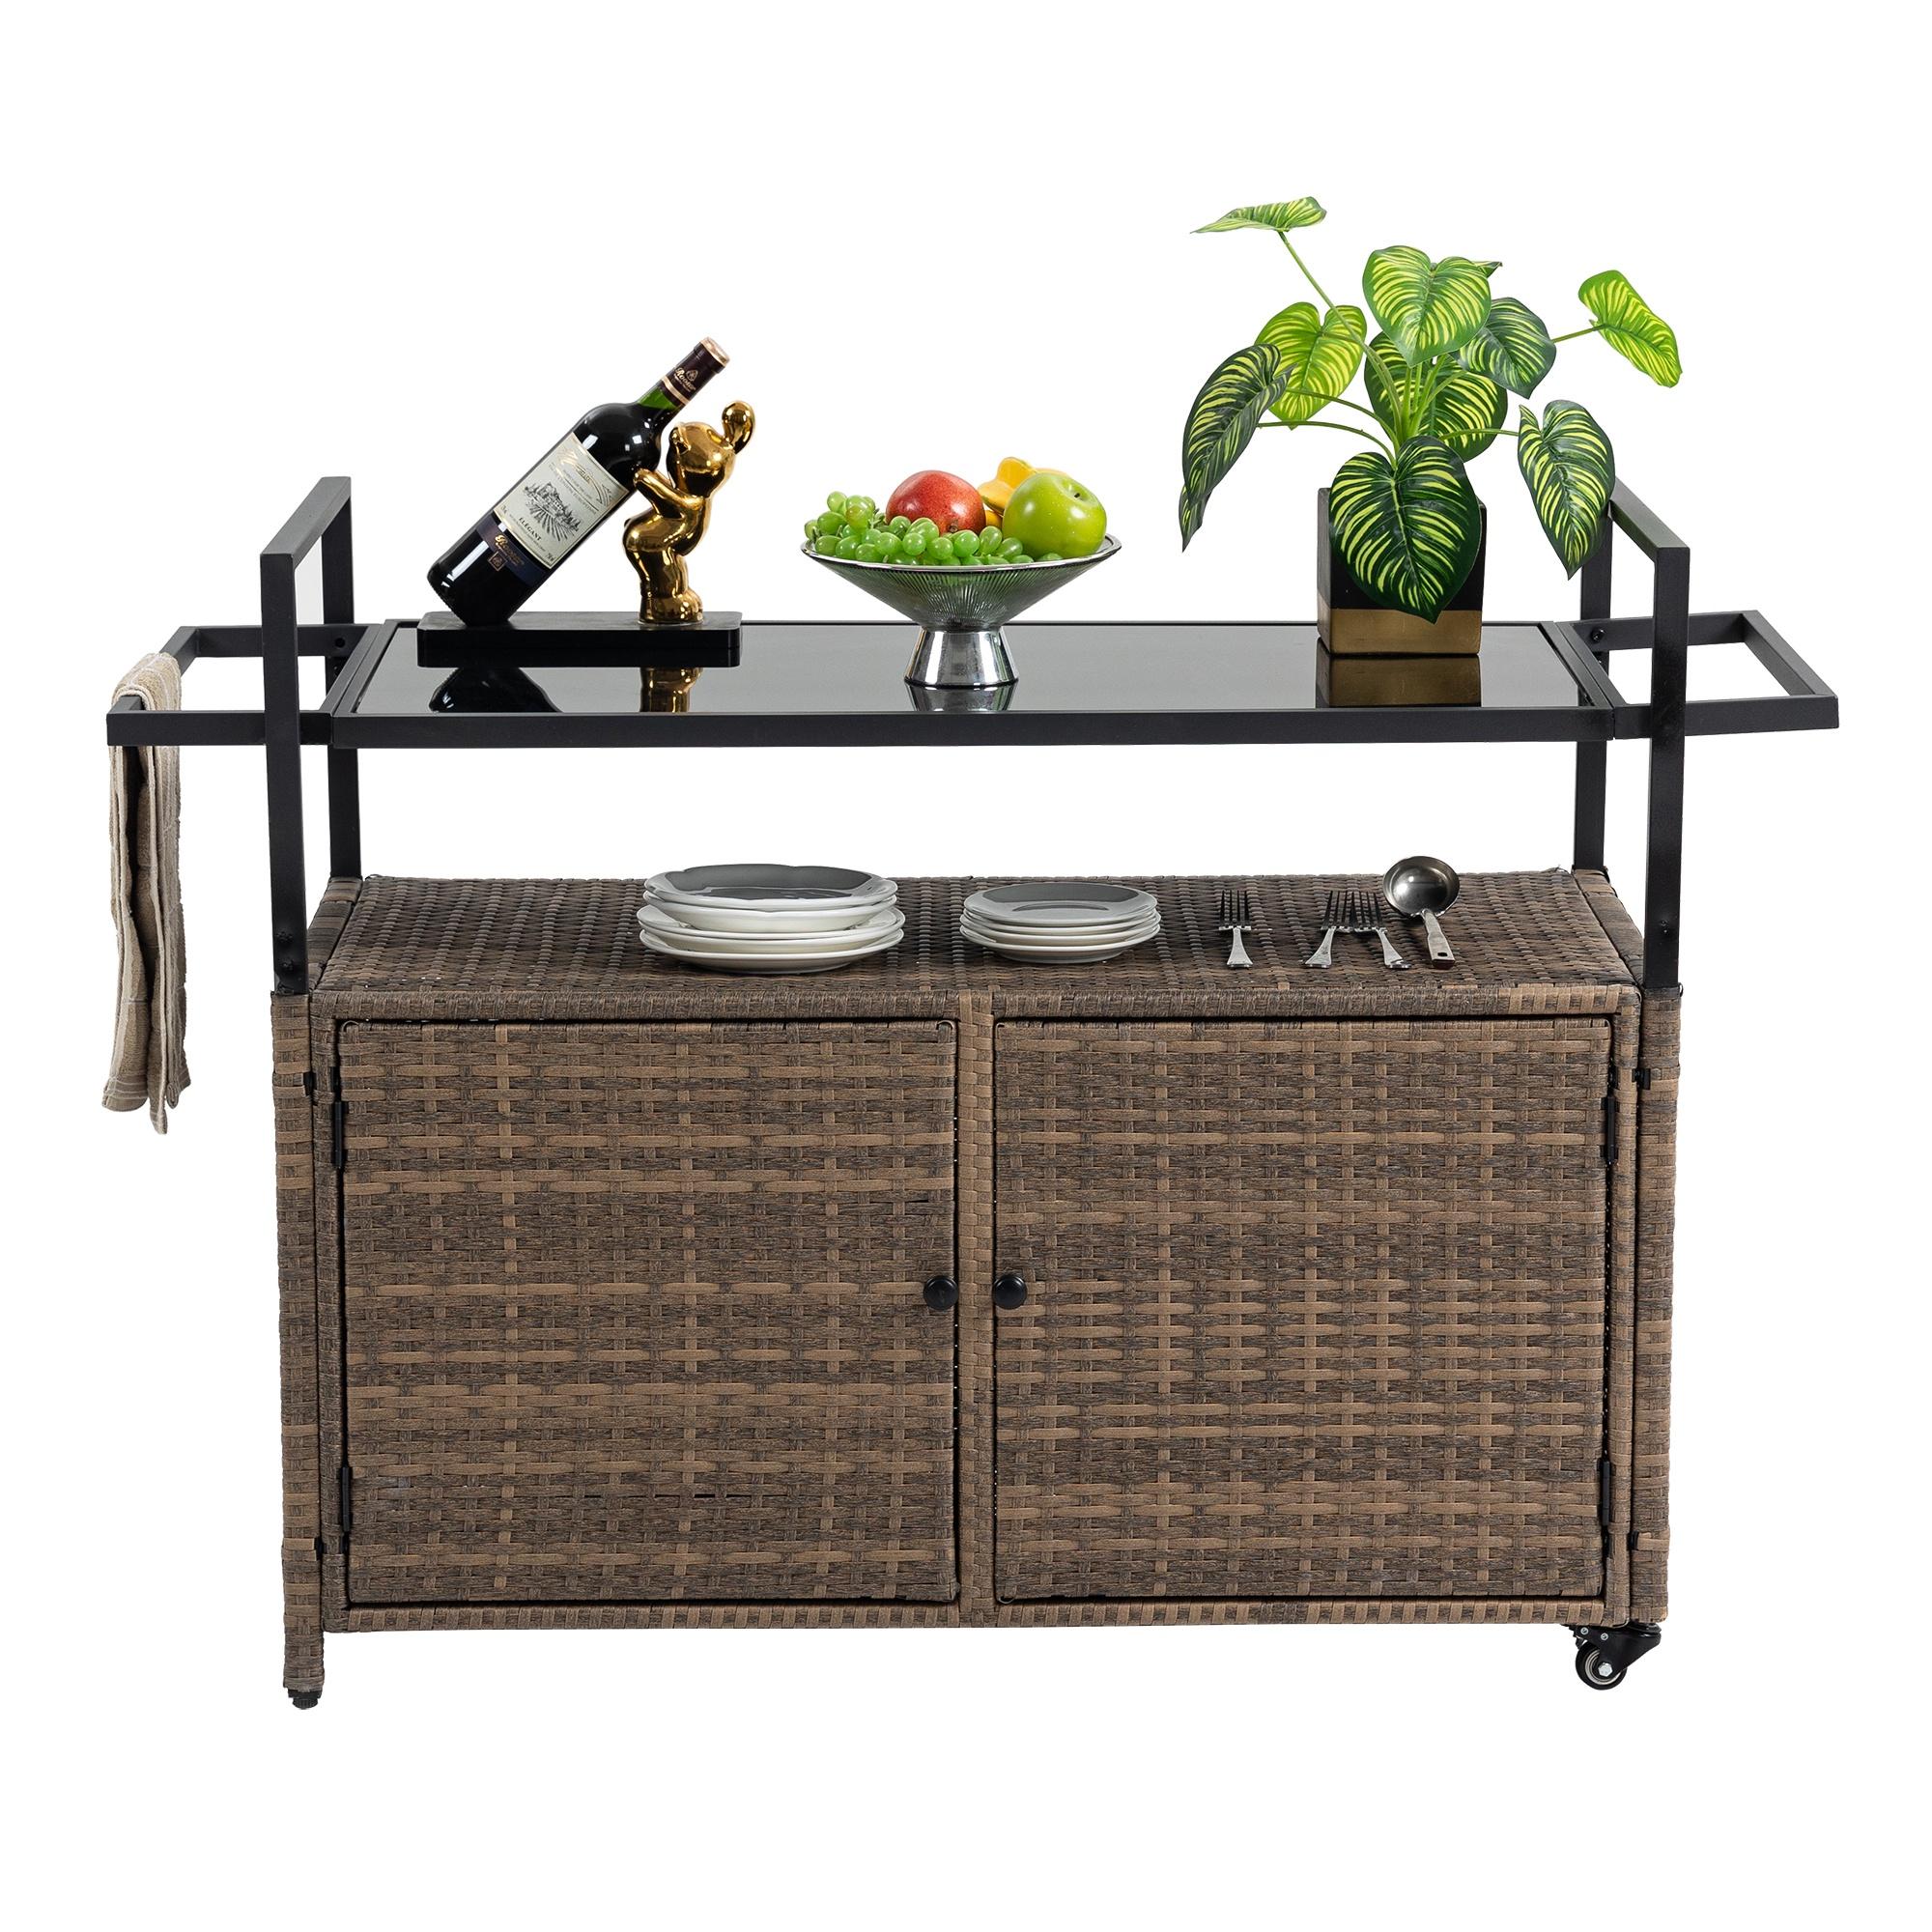 Syngar Patio Bar Cart on Wheels, Outdoor PE Wicker Bar Counter Table with Glass Top & Storage, Rolling Beverage Bar Counter Table, Wine Serving Cart for Garden, Porch, Backyard, Poolside, Light Brown - image 1 of 9